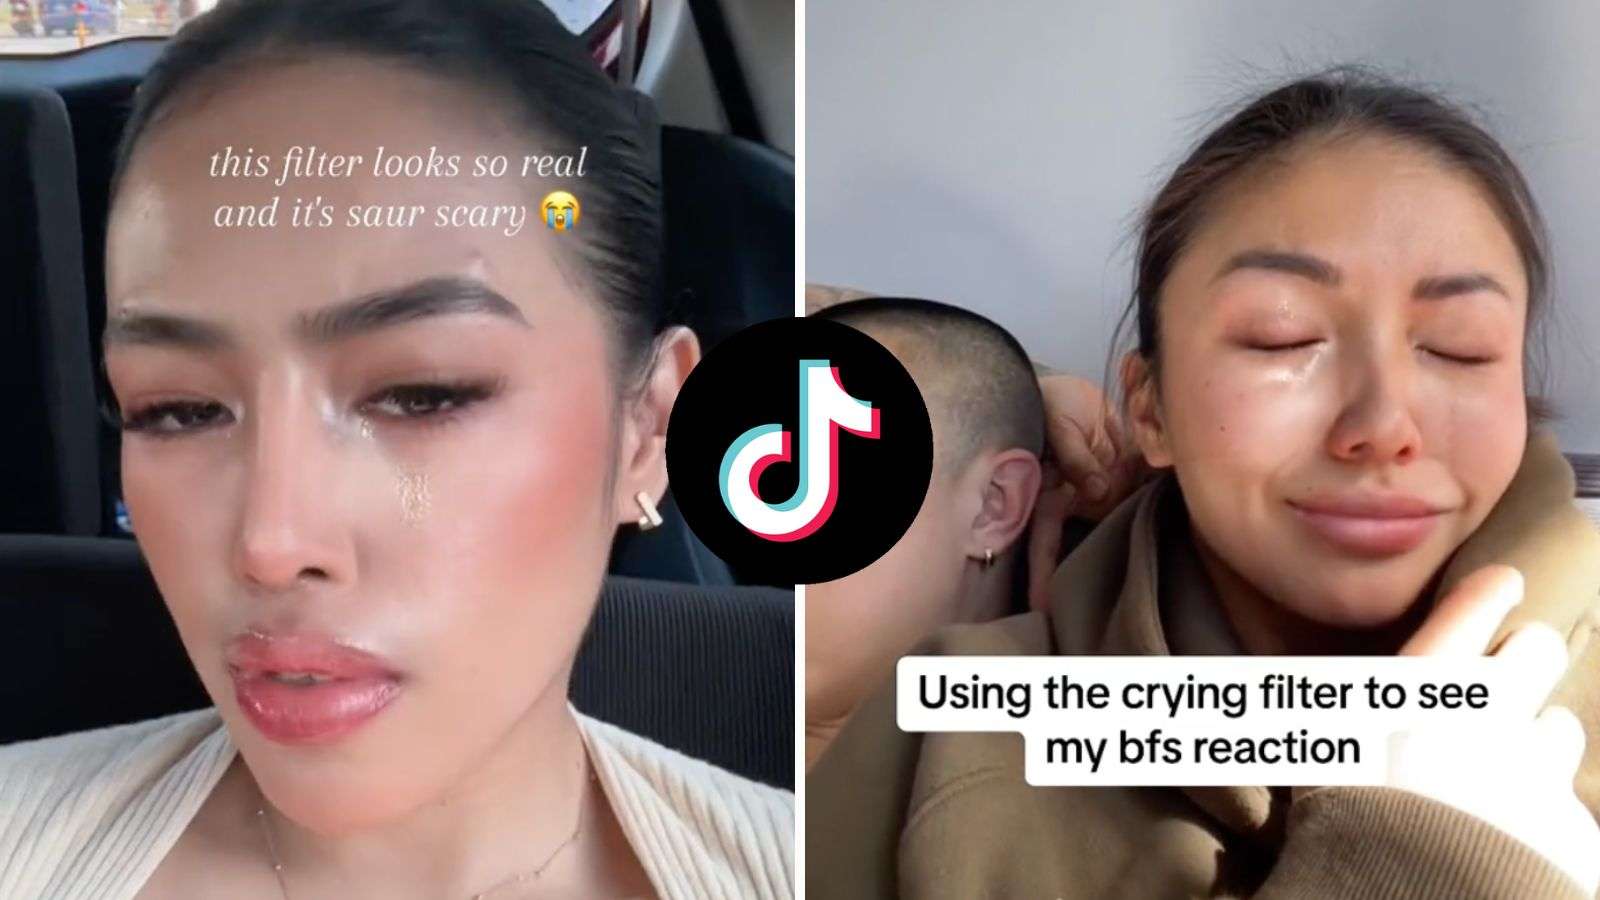 TikTok users trying out the crying filter